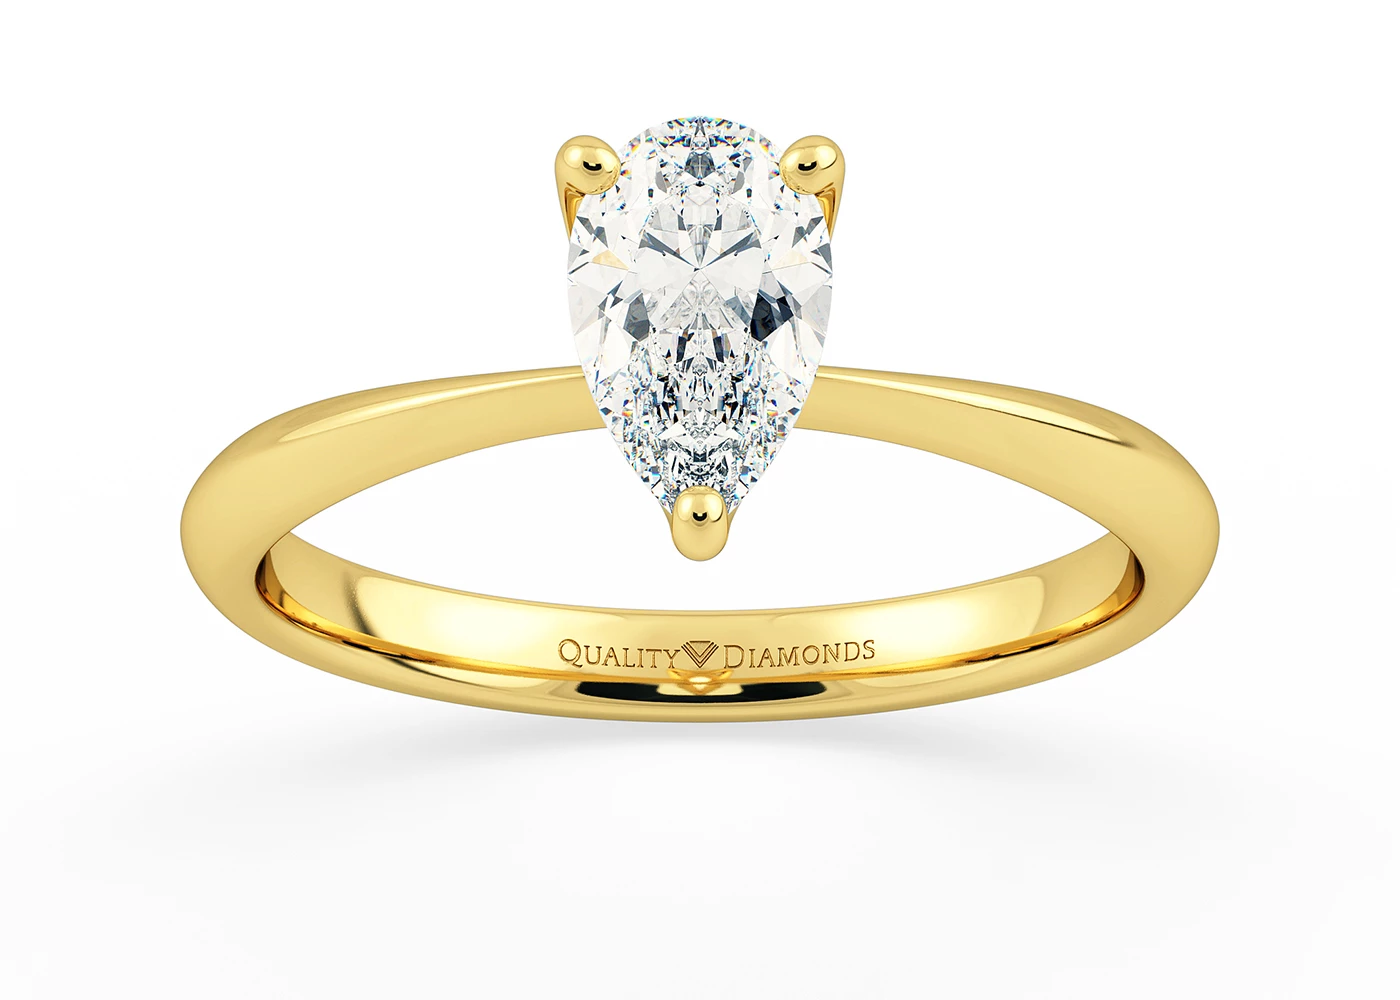 Two Carat Pear Solitaire Diamond Engagement Ring in 18K Yellow Gold